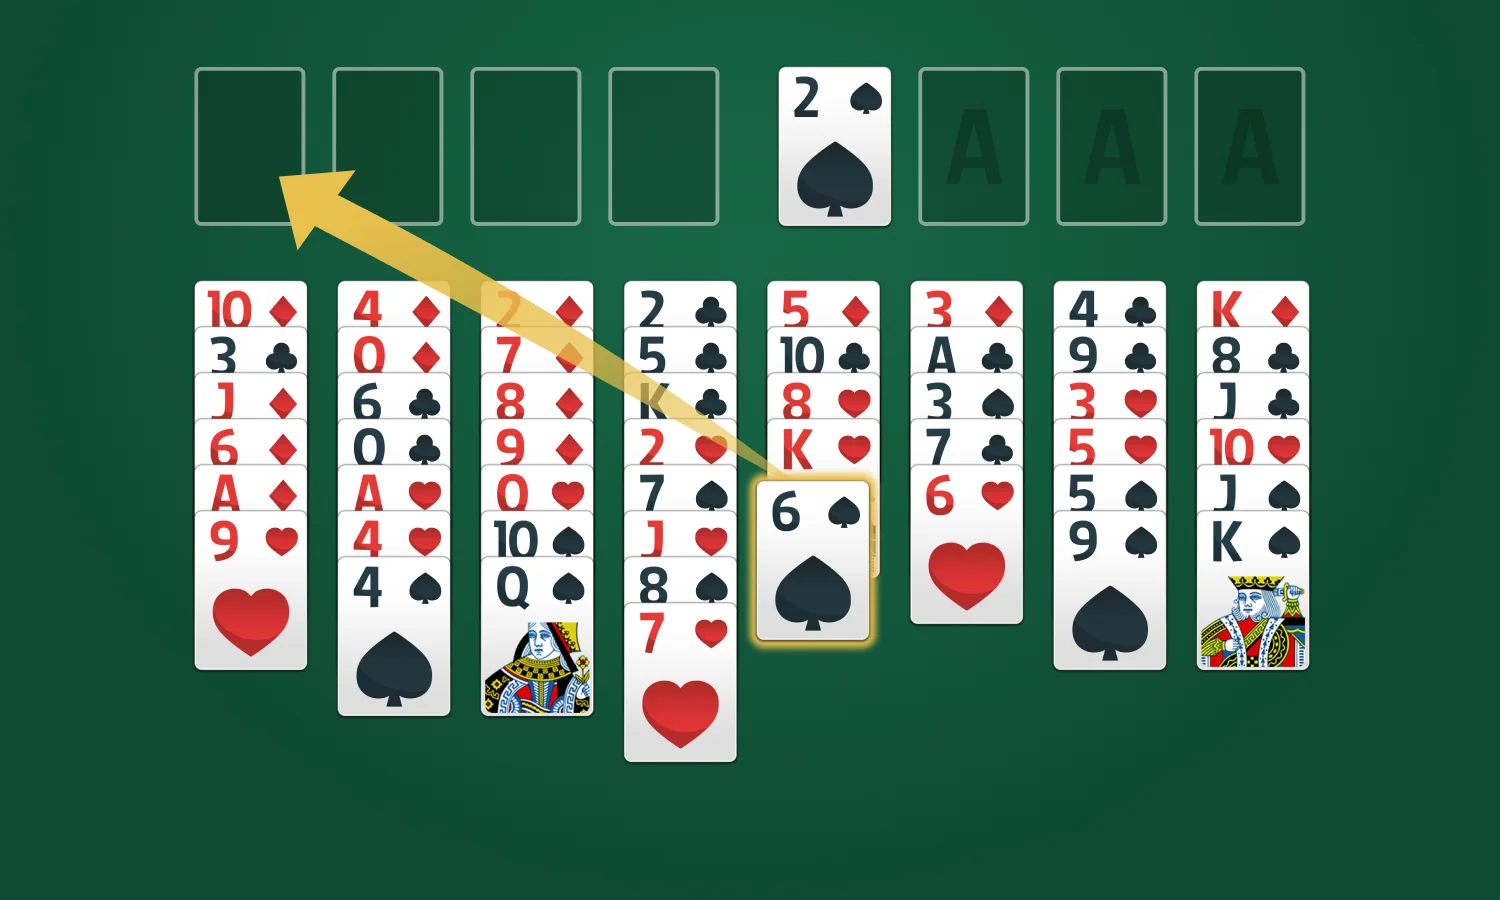 FreeCell Solitaire Rules: Step 3